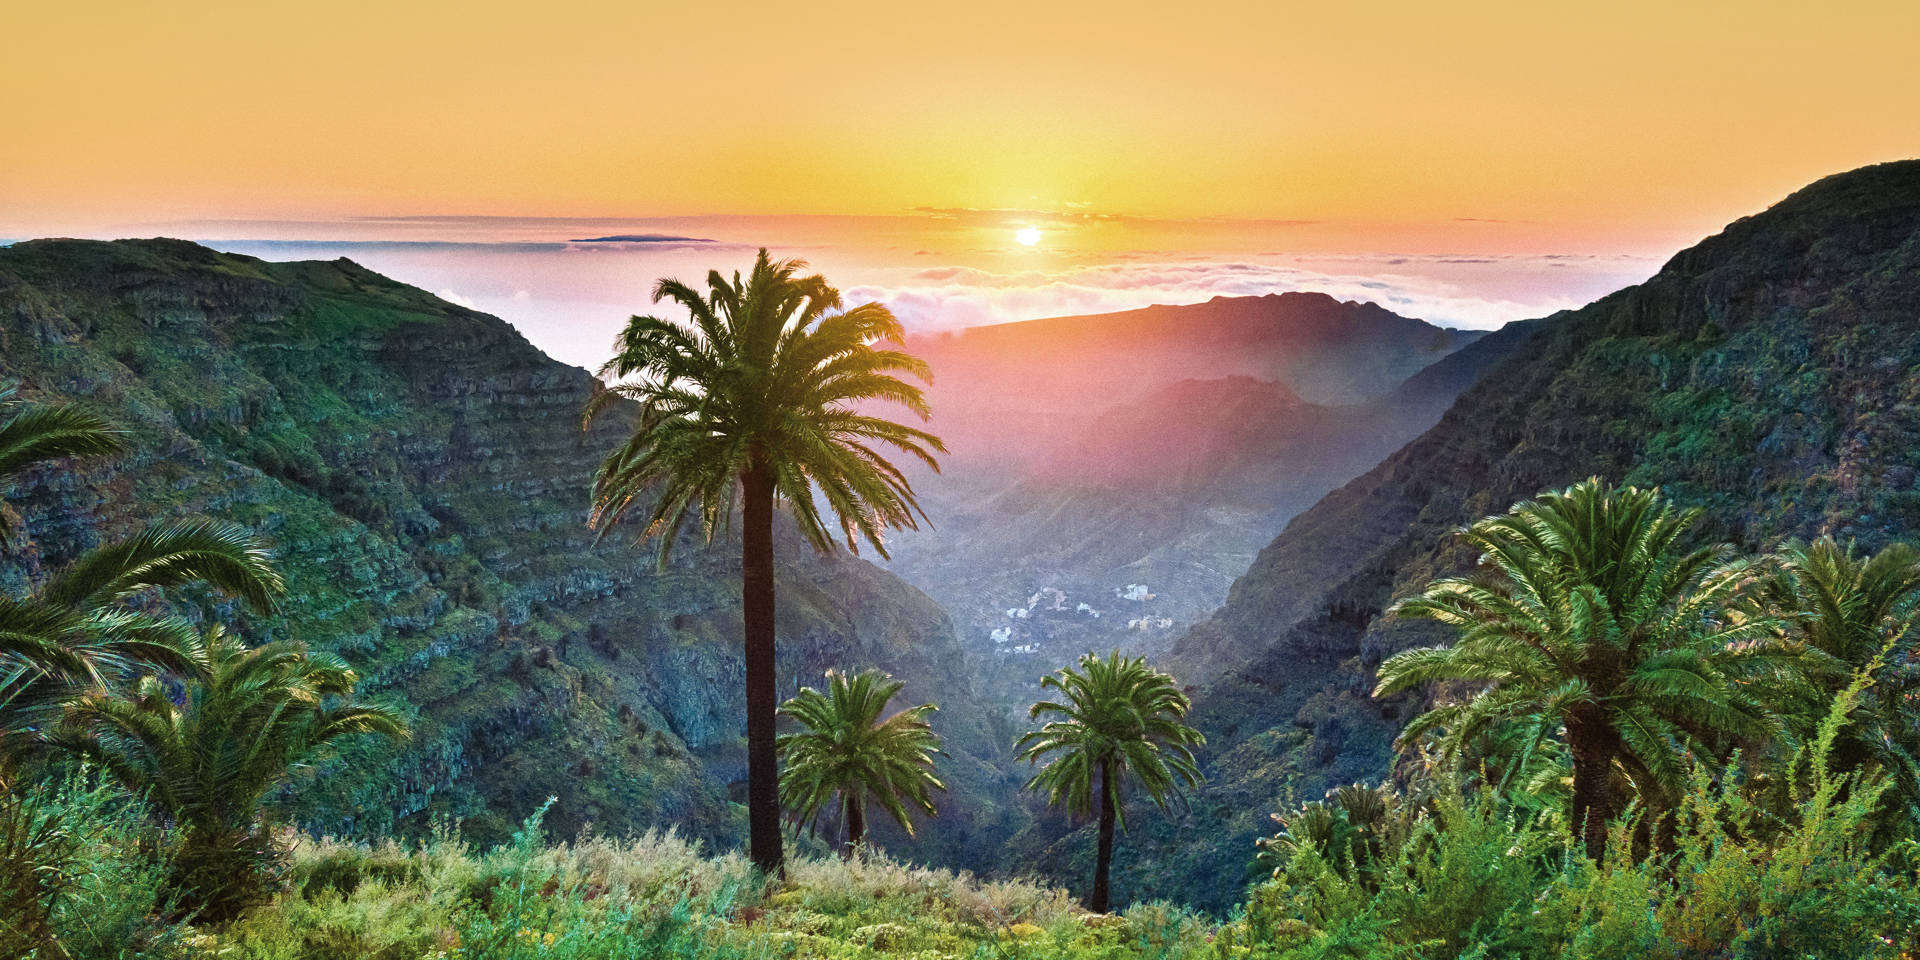 Amazing tropical scenery with palm trees and mountains at sunset